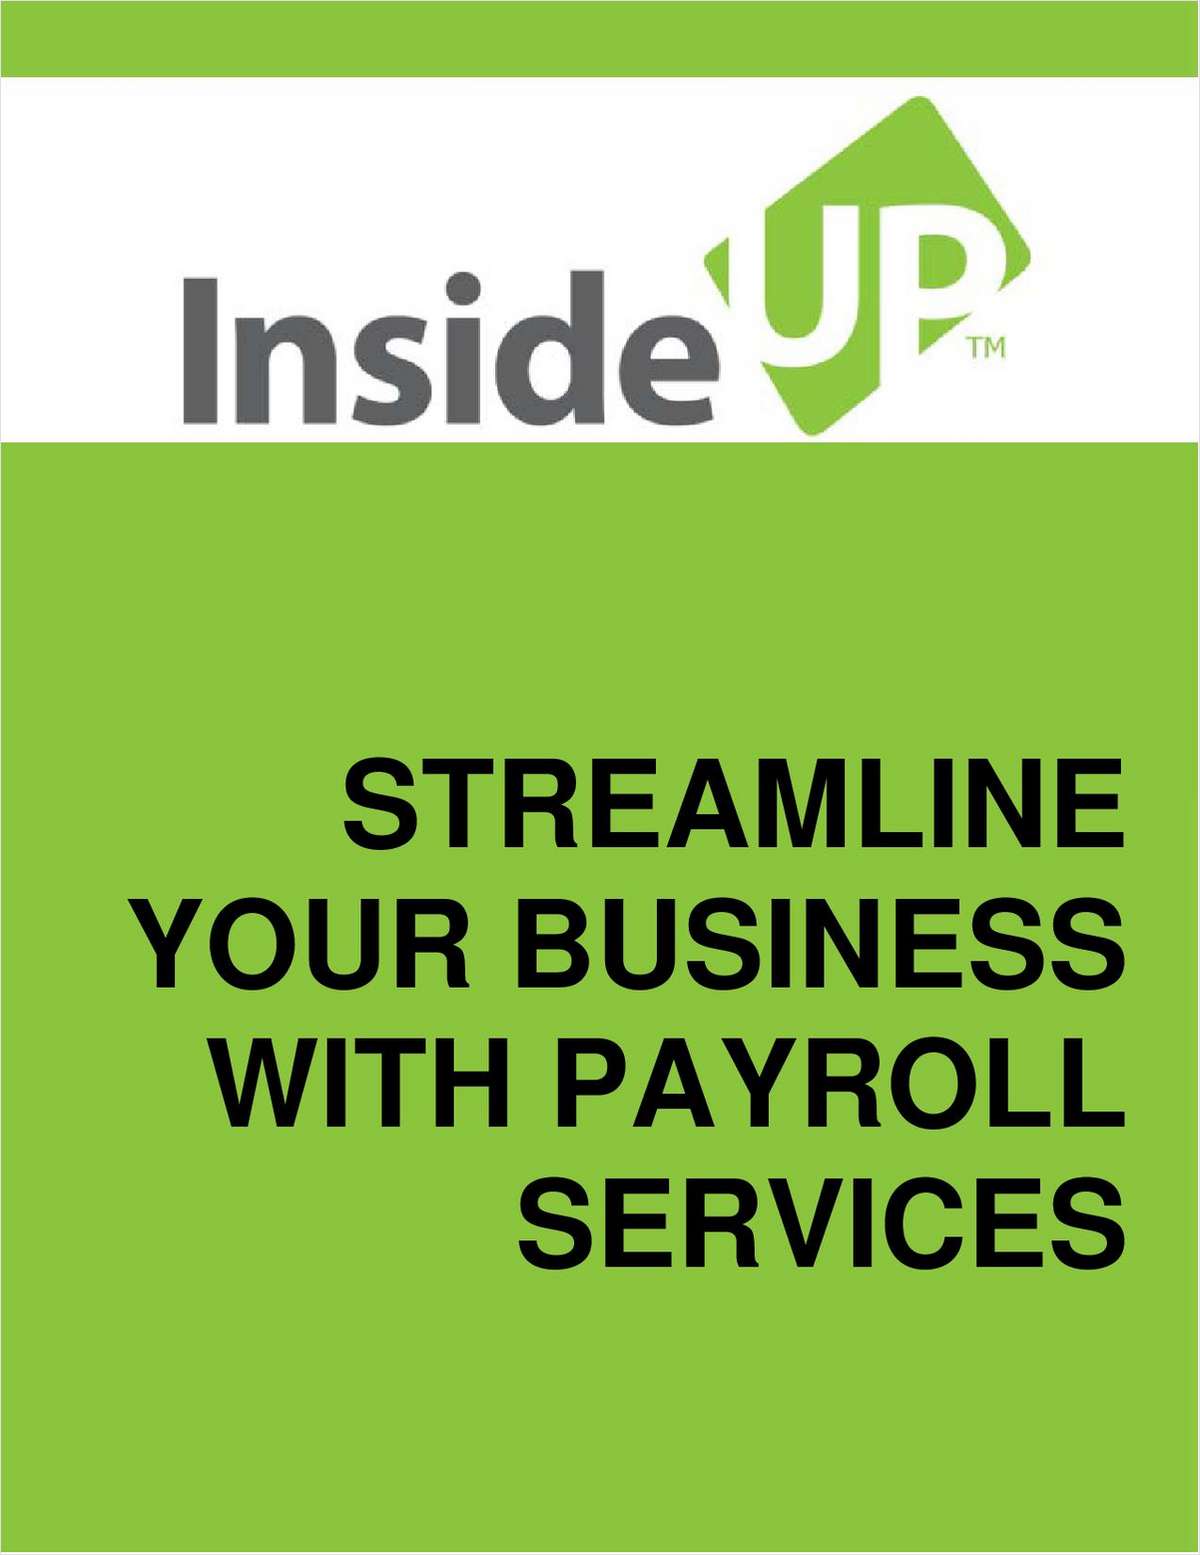 Choosing the Right Time to Outsource Payroll for Your Growing Small Business